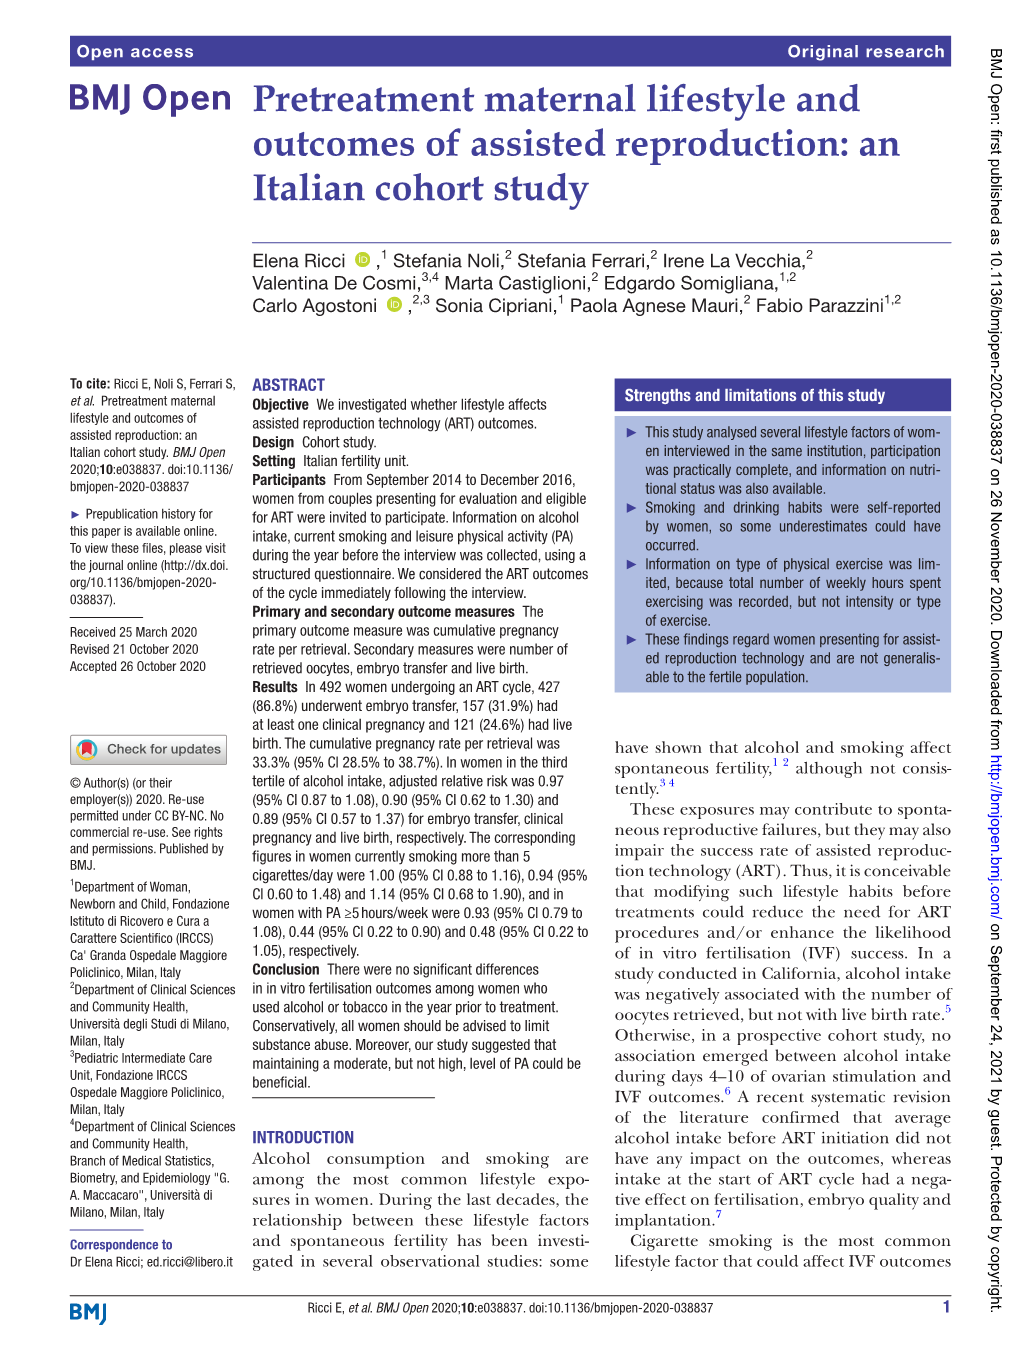 Pretreatment Maternal Lifestyle and Outcomes of Assisted Reproduction: an Italian Cohort Study